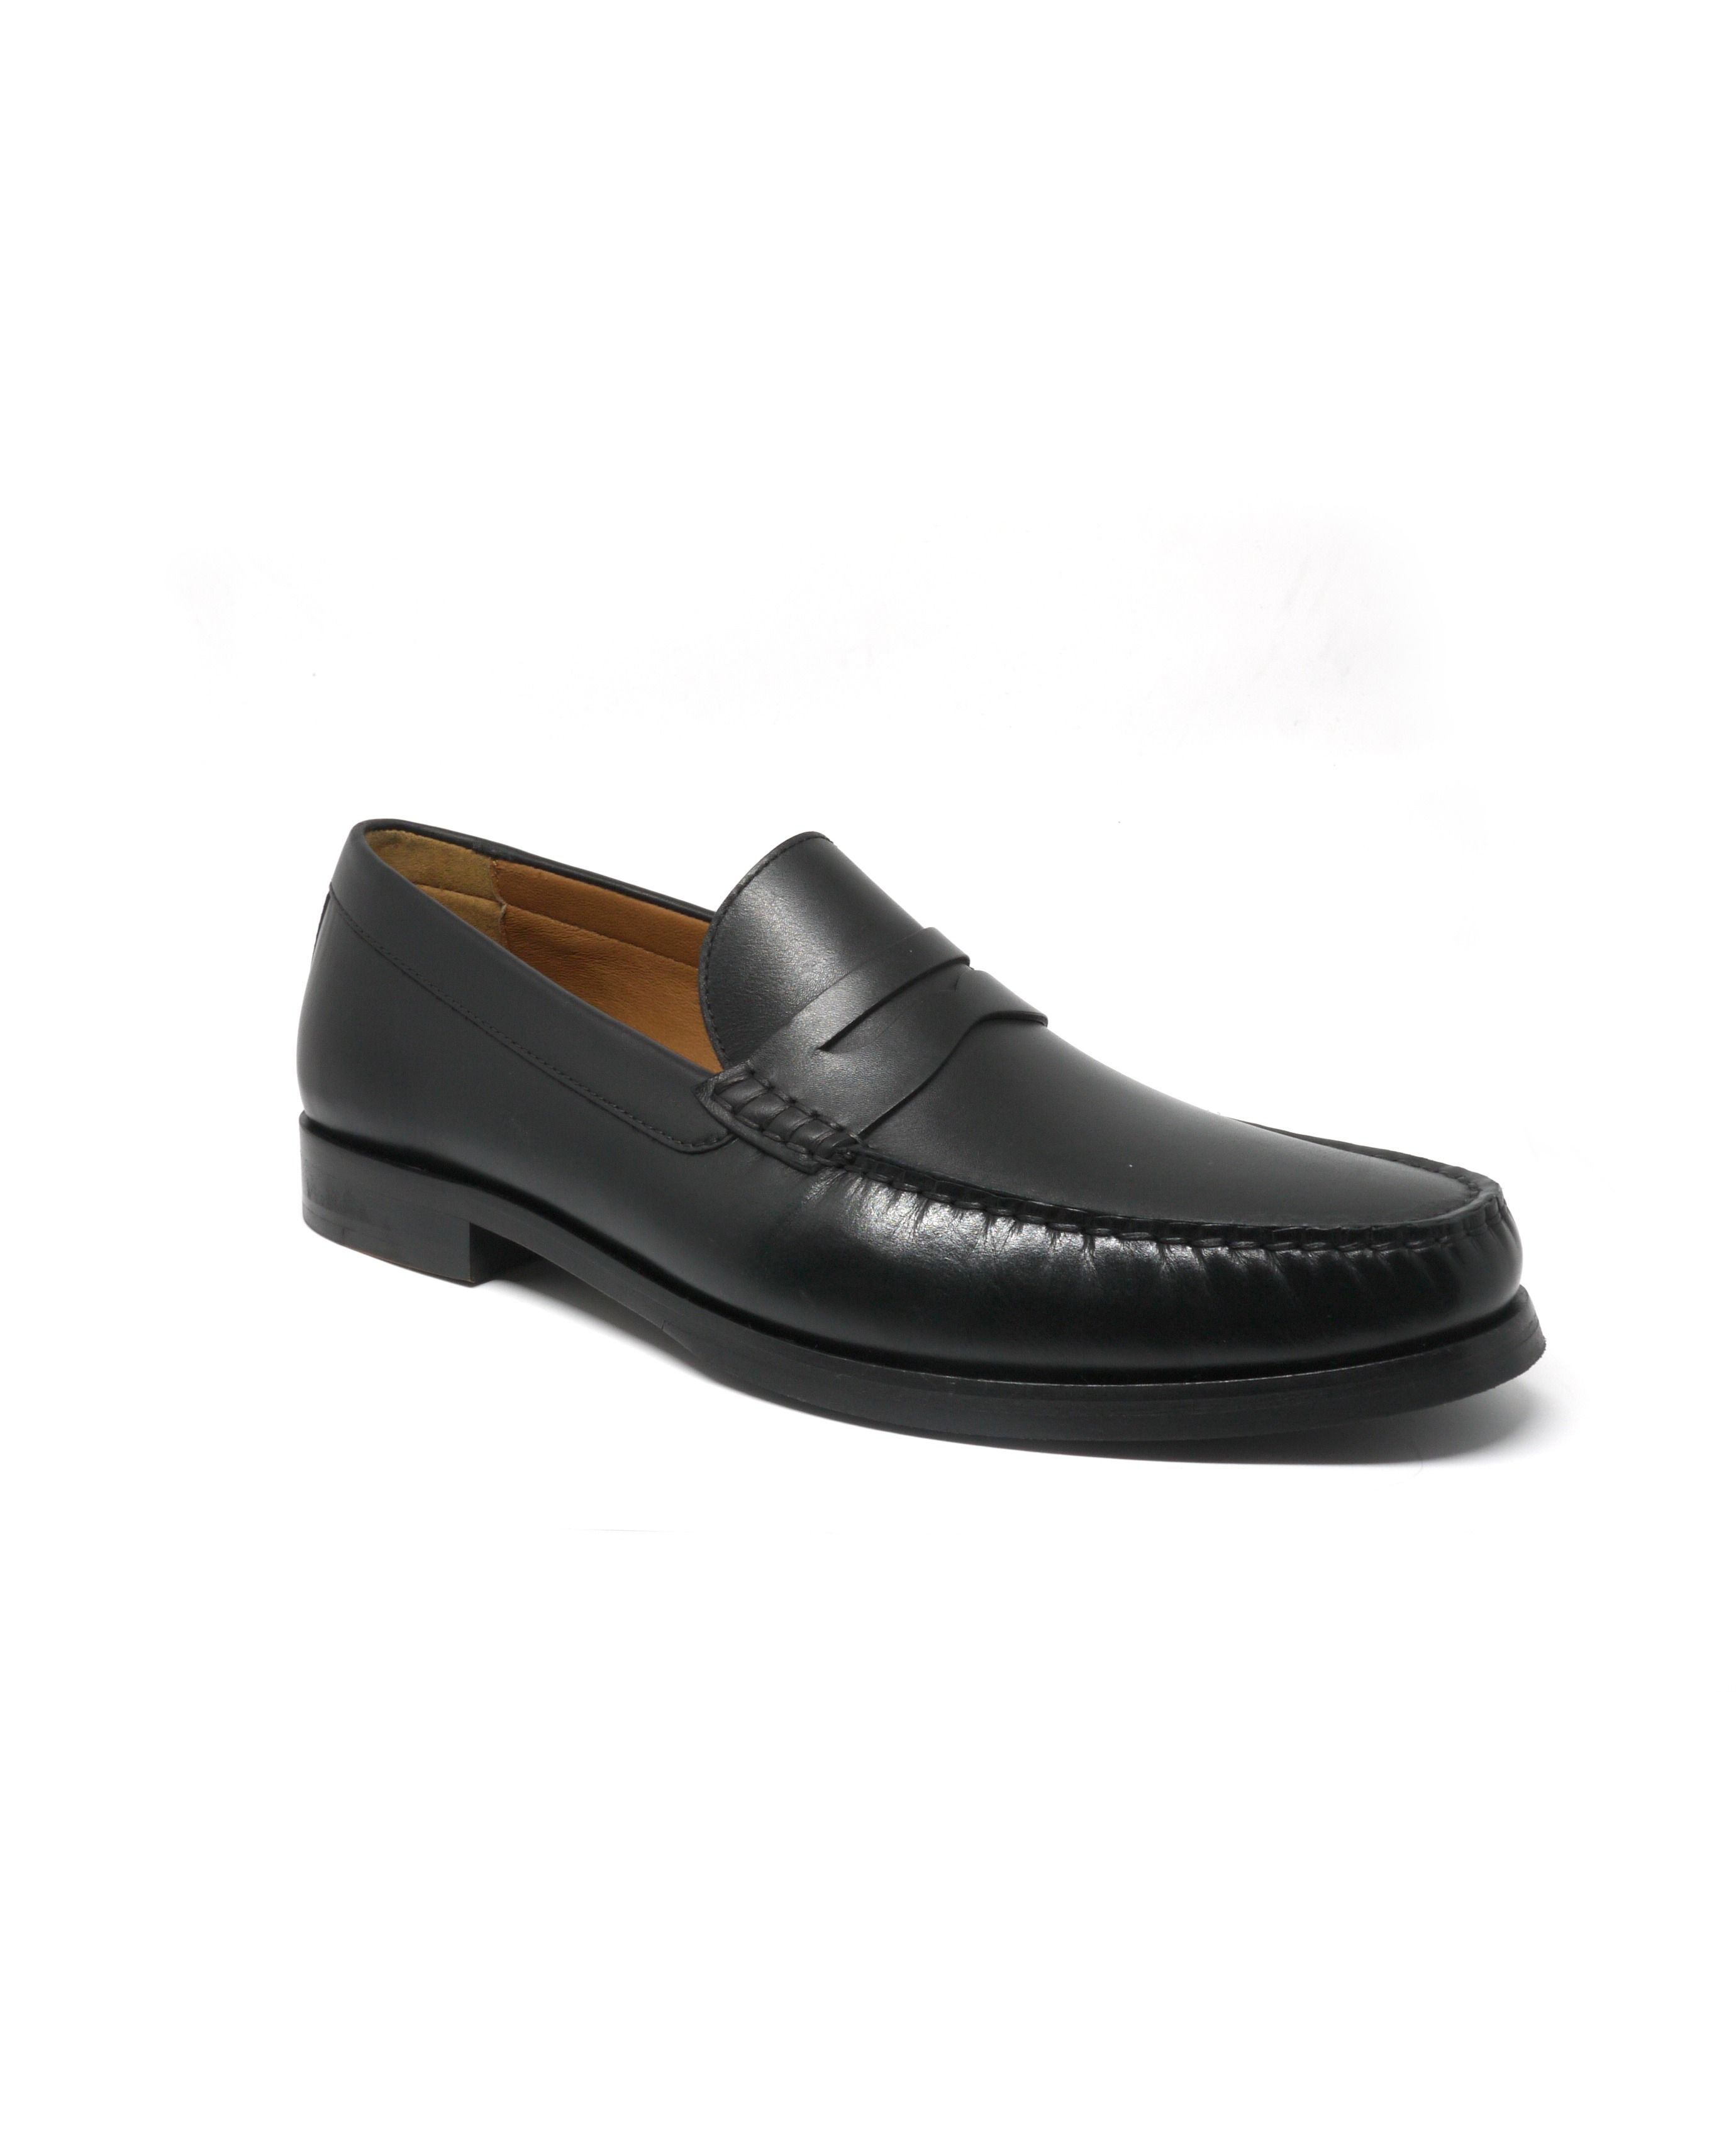 Men's Black Leather Loafers | Savile Row Co